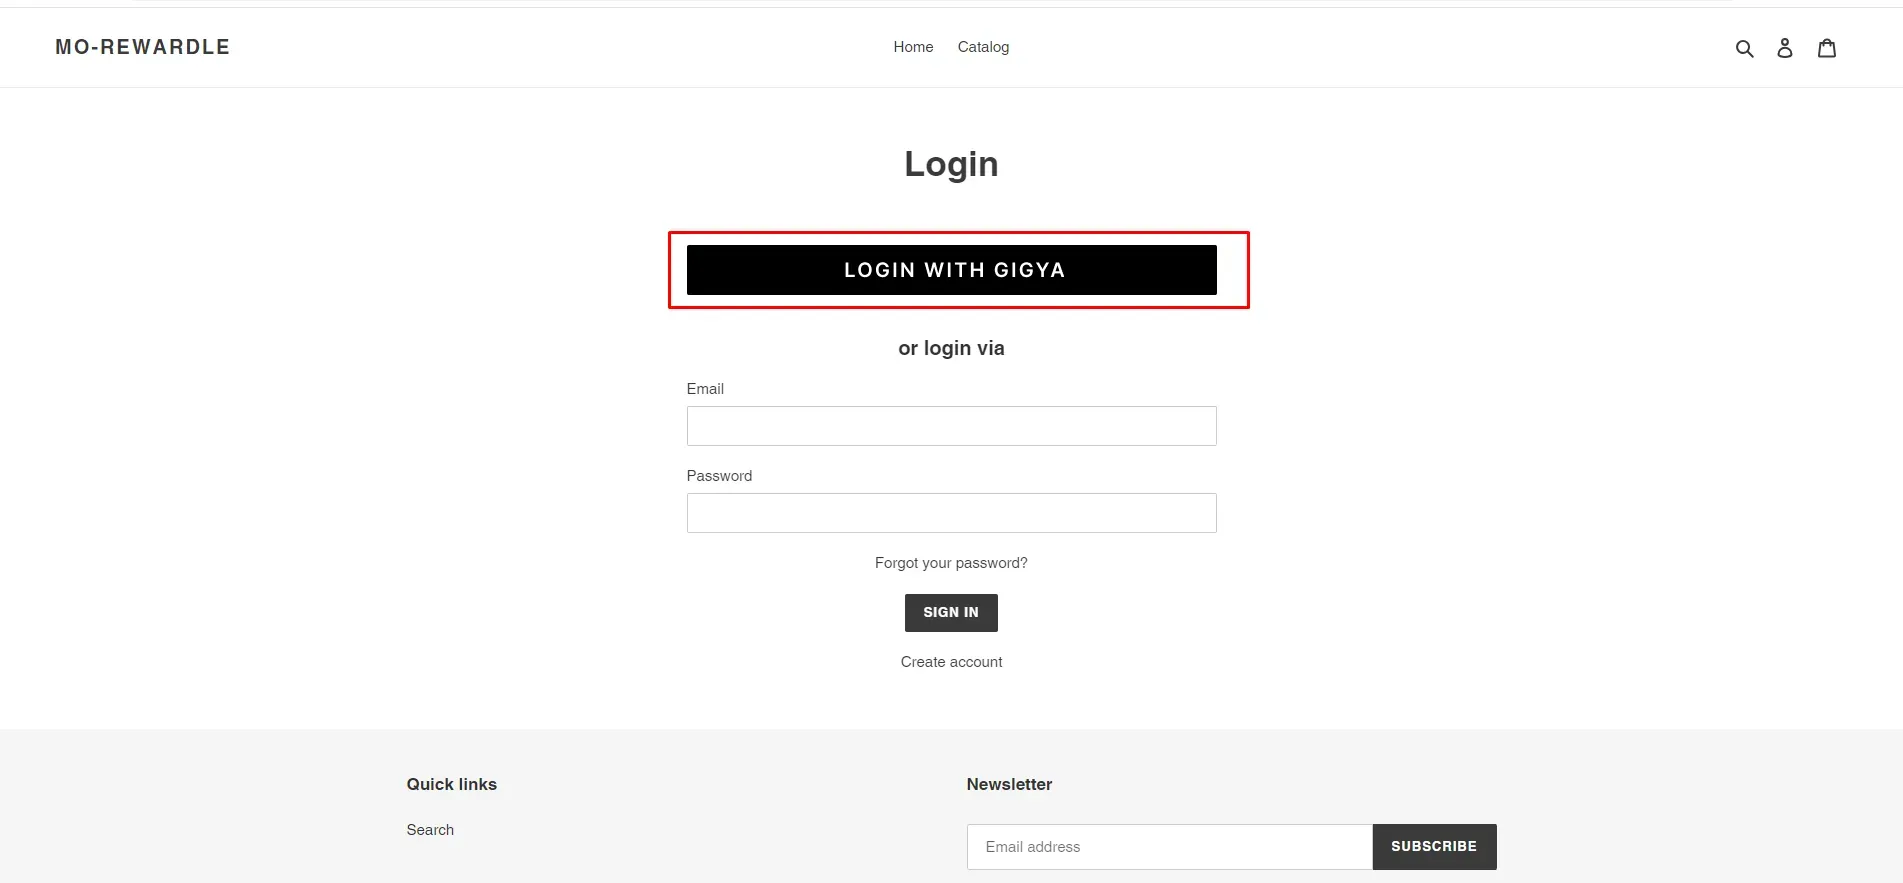 Shopify Gigya SSO Login - select project google oauth provider